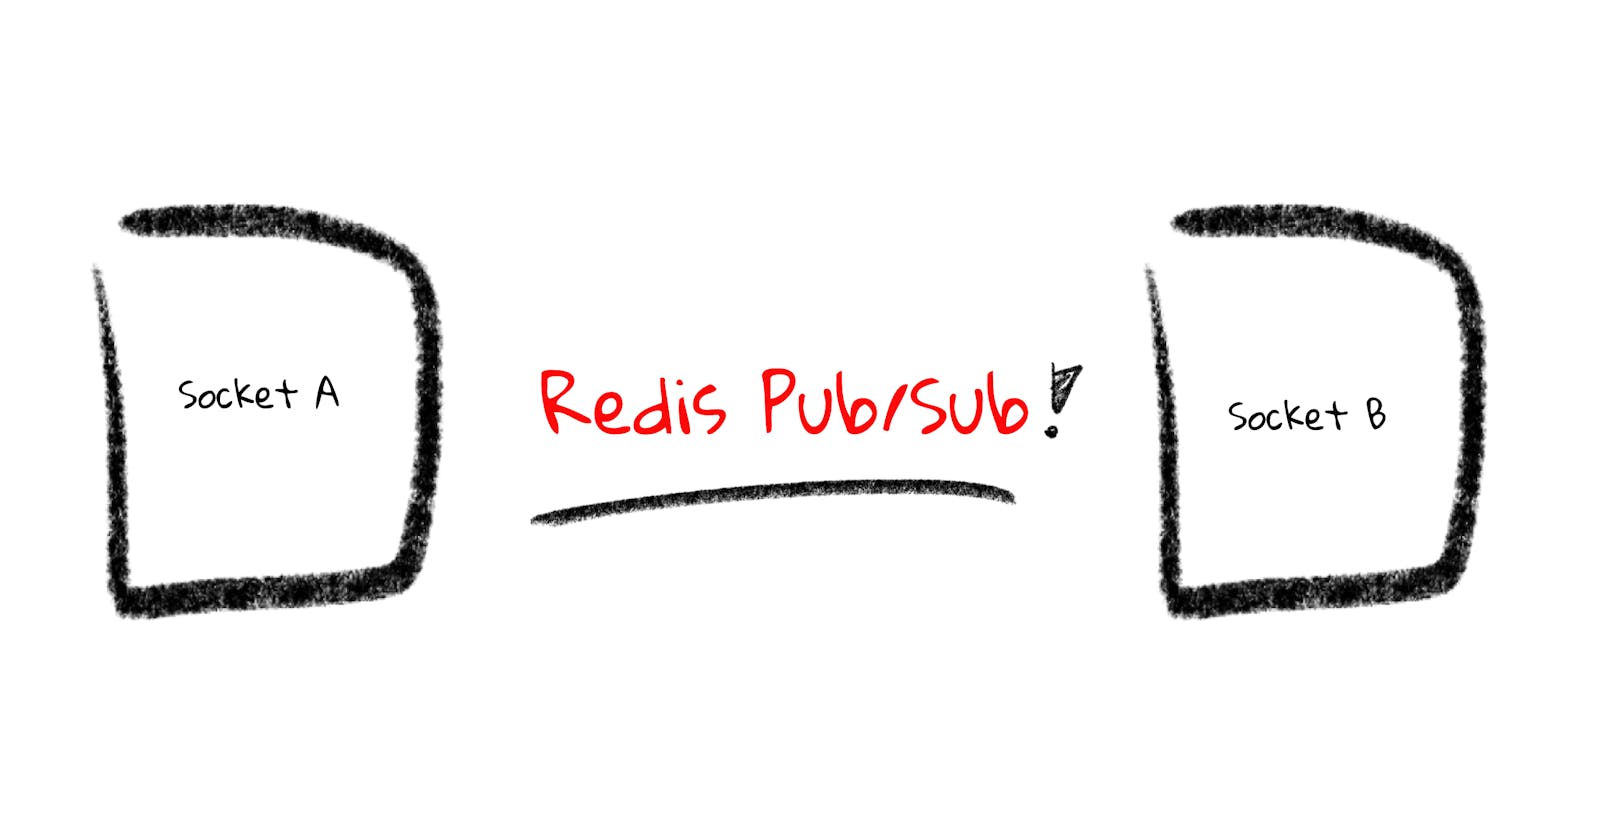 How to use Redis pub/sub to handle socket.io sessions across multiple instances ?